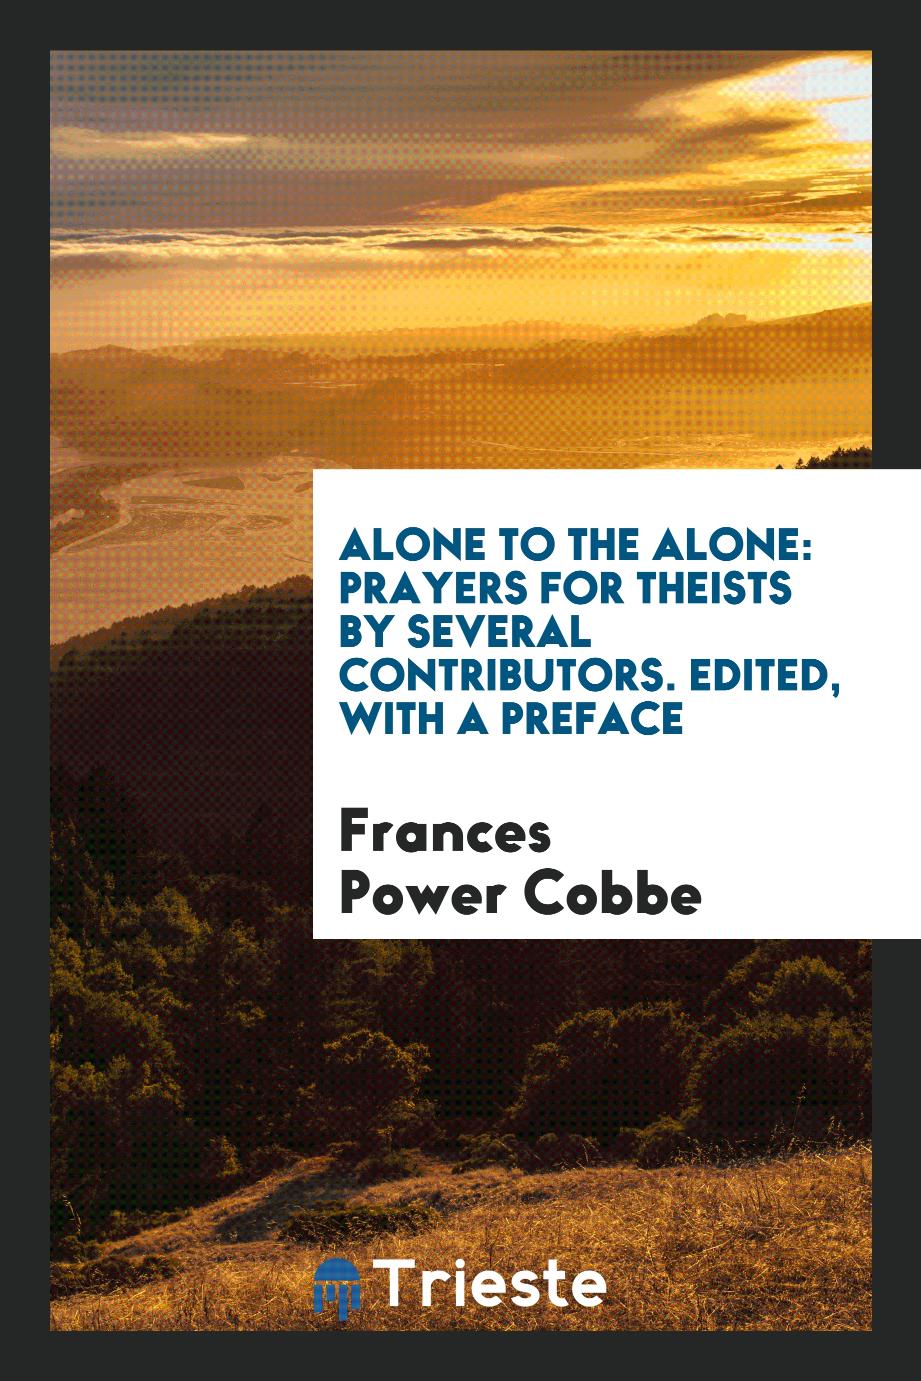 Alone to the Alone: Prayers for Theists by Several Contributors. Edited, with a Preface